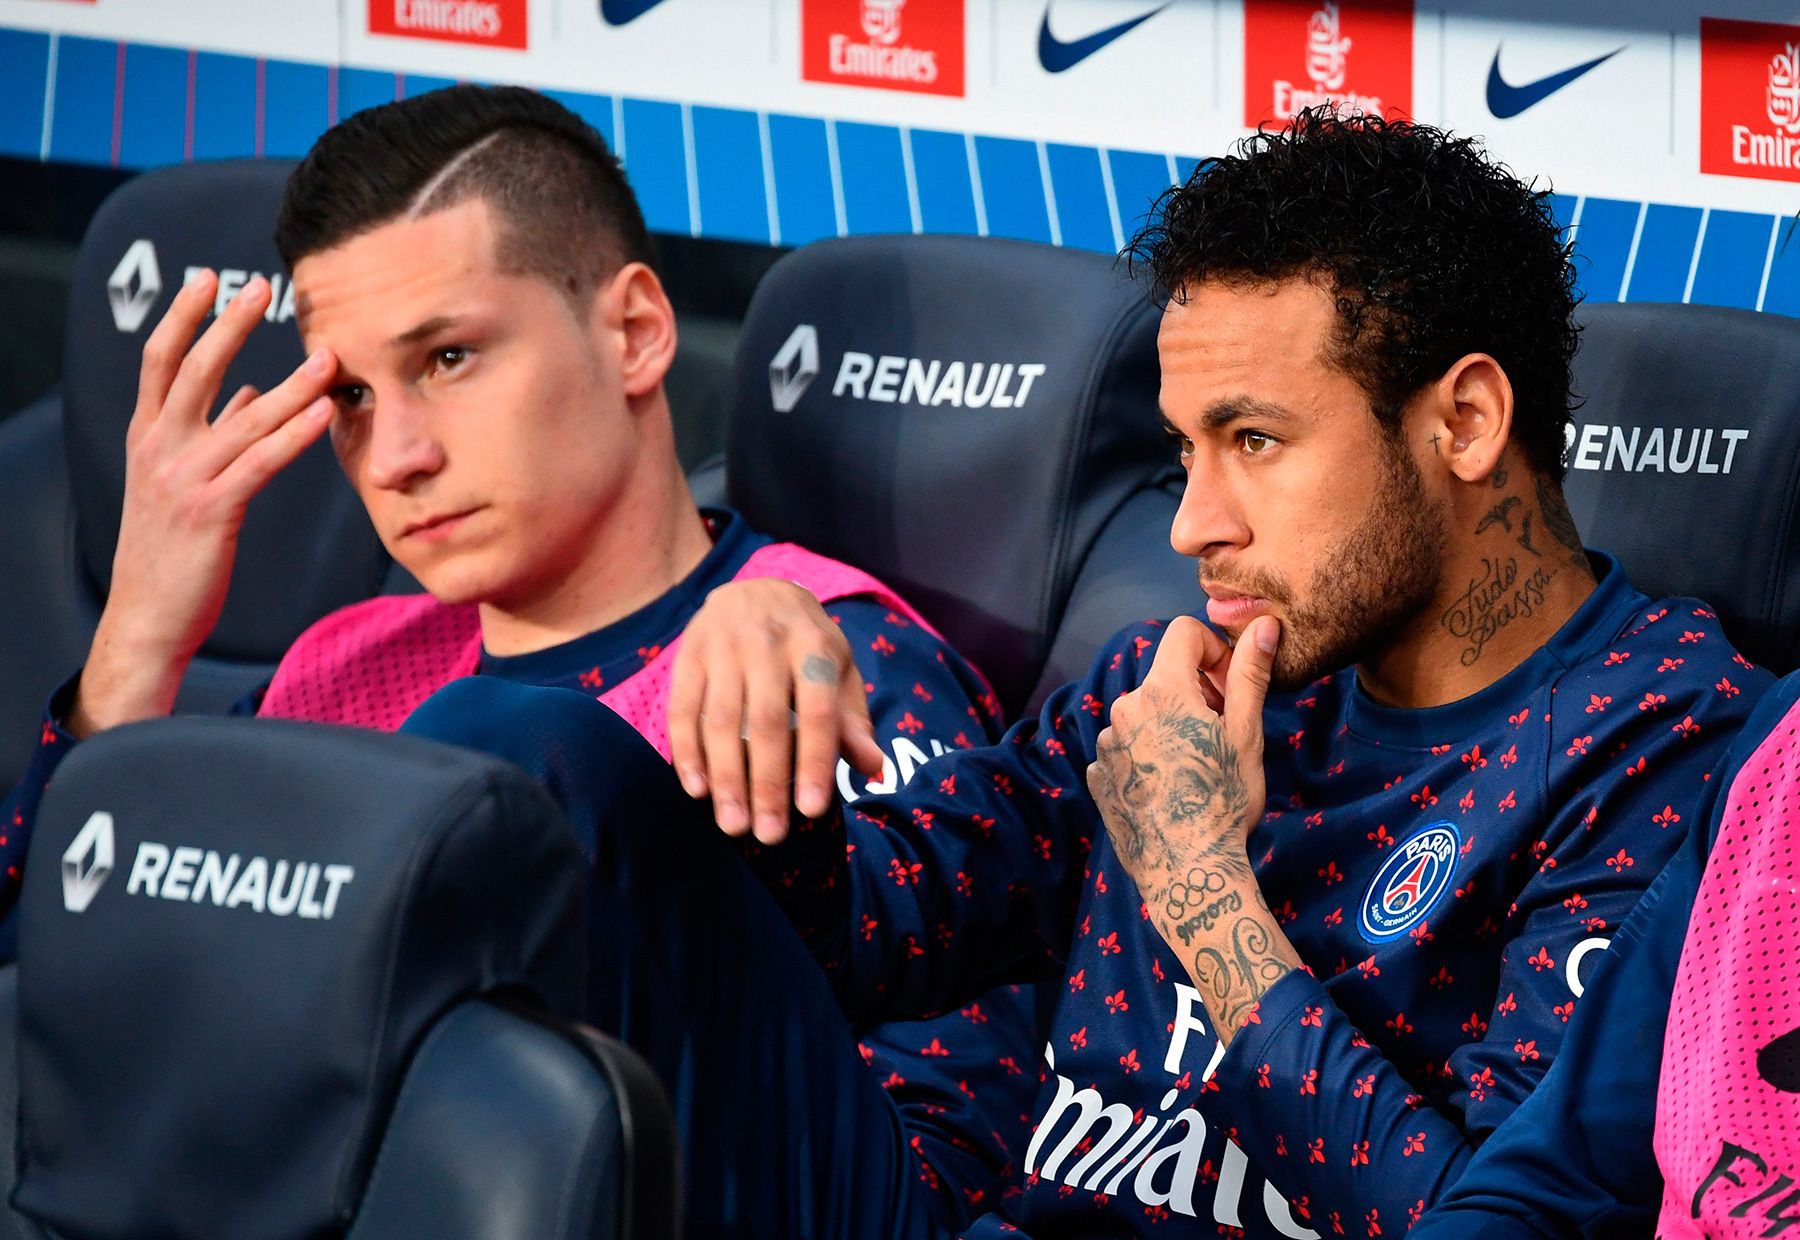 Draxler and Neymar in the bench in a PSG match